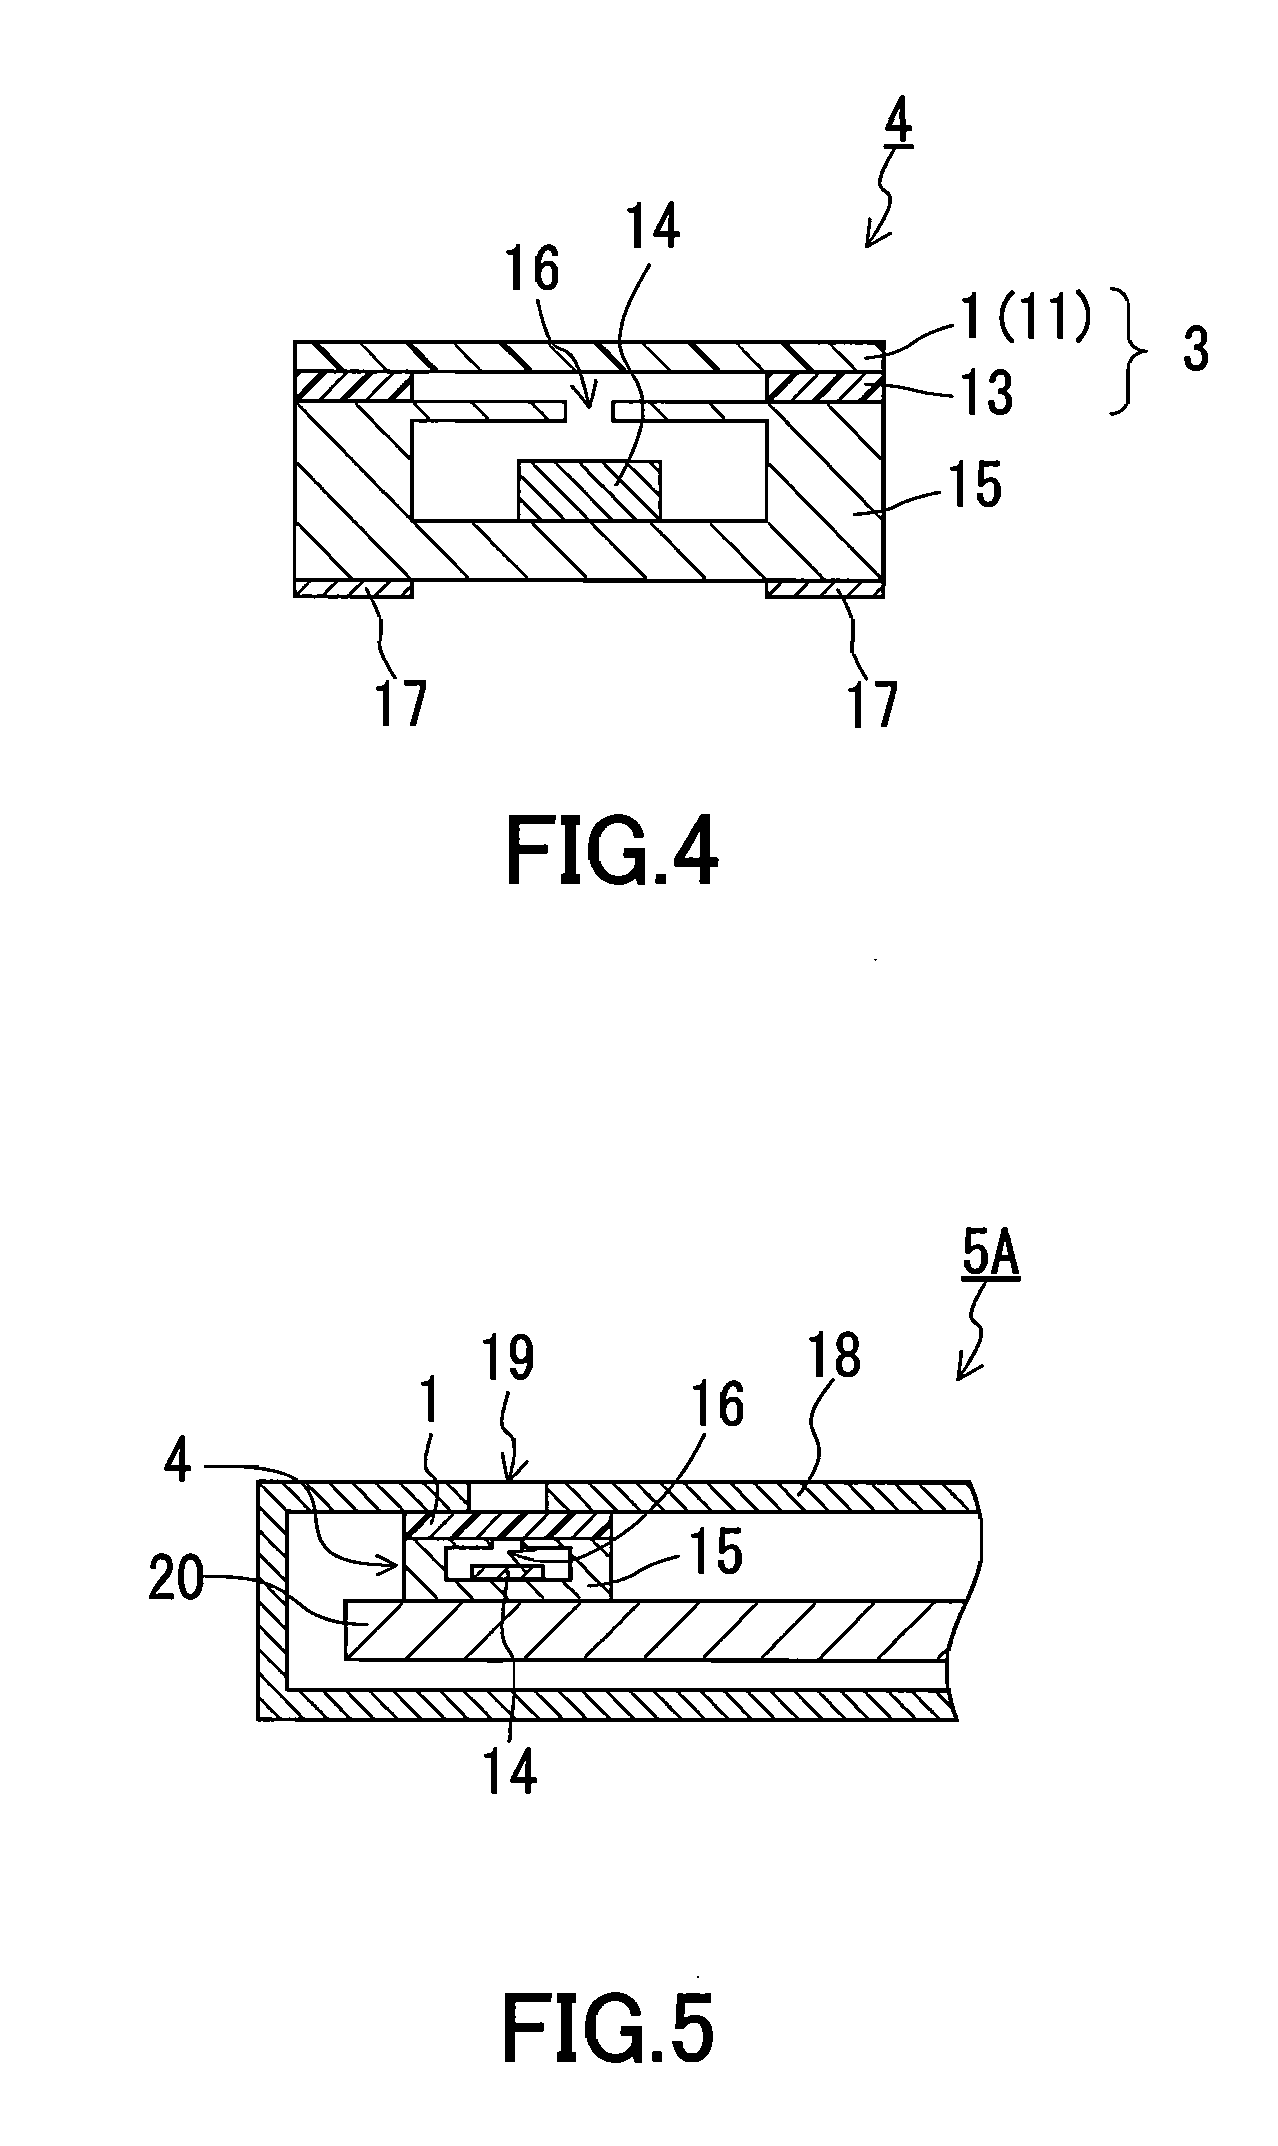 Sound-transmitting membrane for microphone, sound-transmitting membrane member for microphone provided with the membrane, microphone, and electronic device provided with microphone